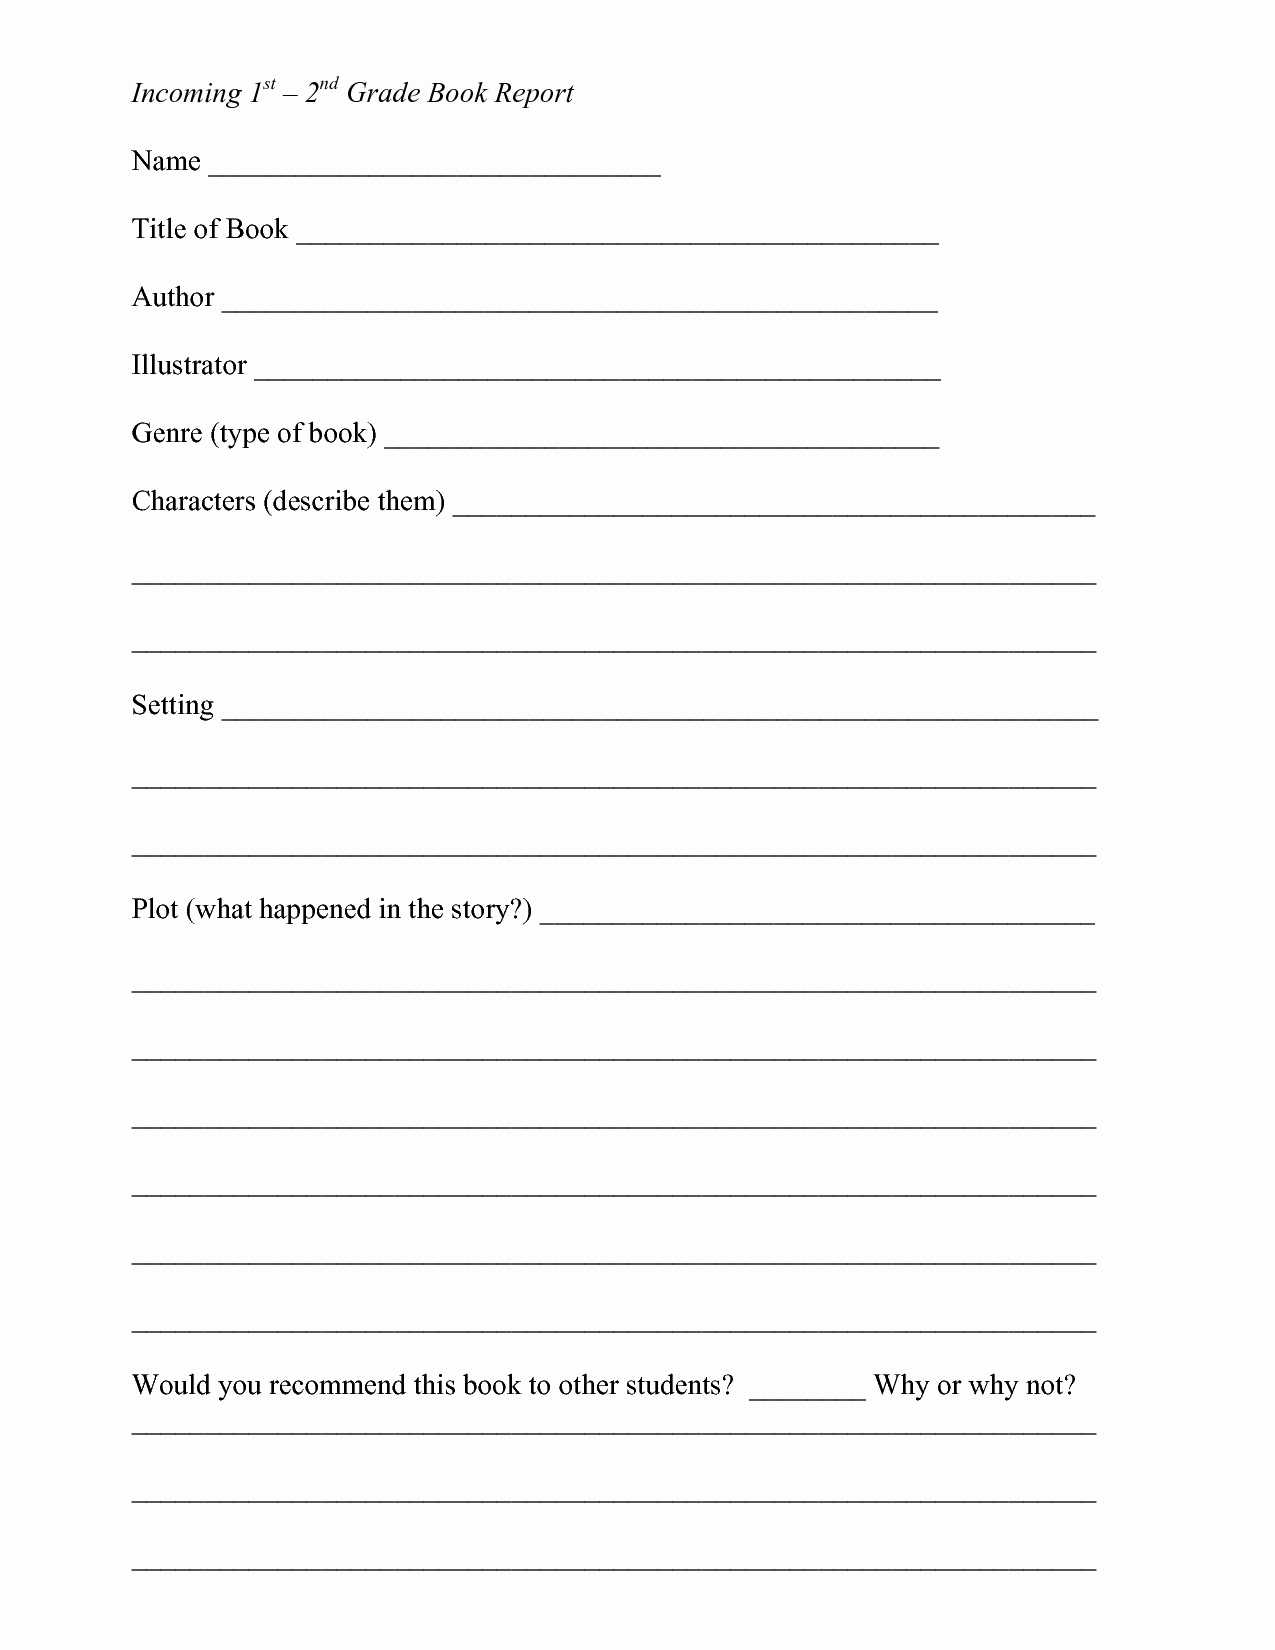 Fiction Book Report Template 6Th Grade For 7Th Graders Pdf For Book Report Template 2Nd Grade